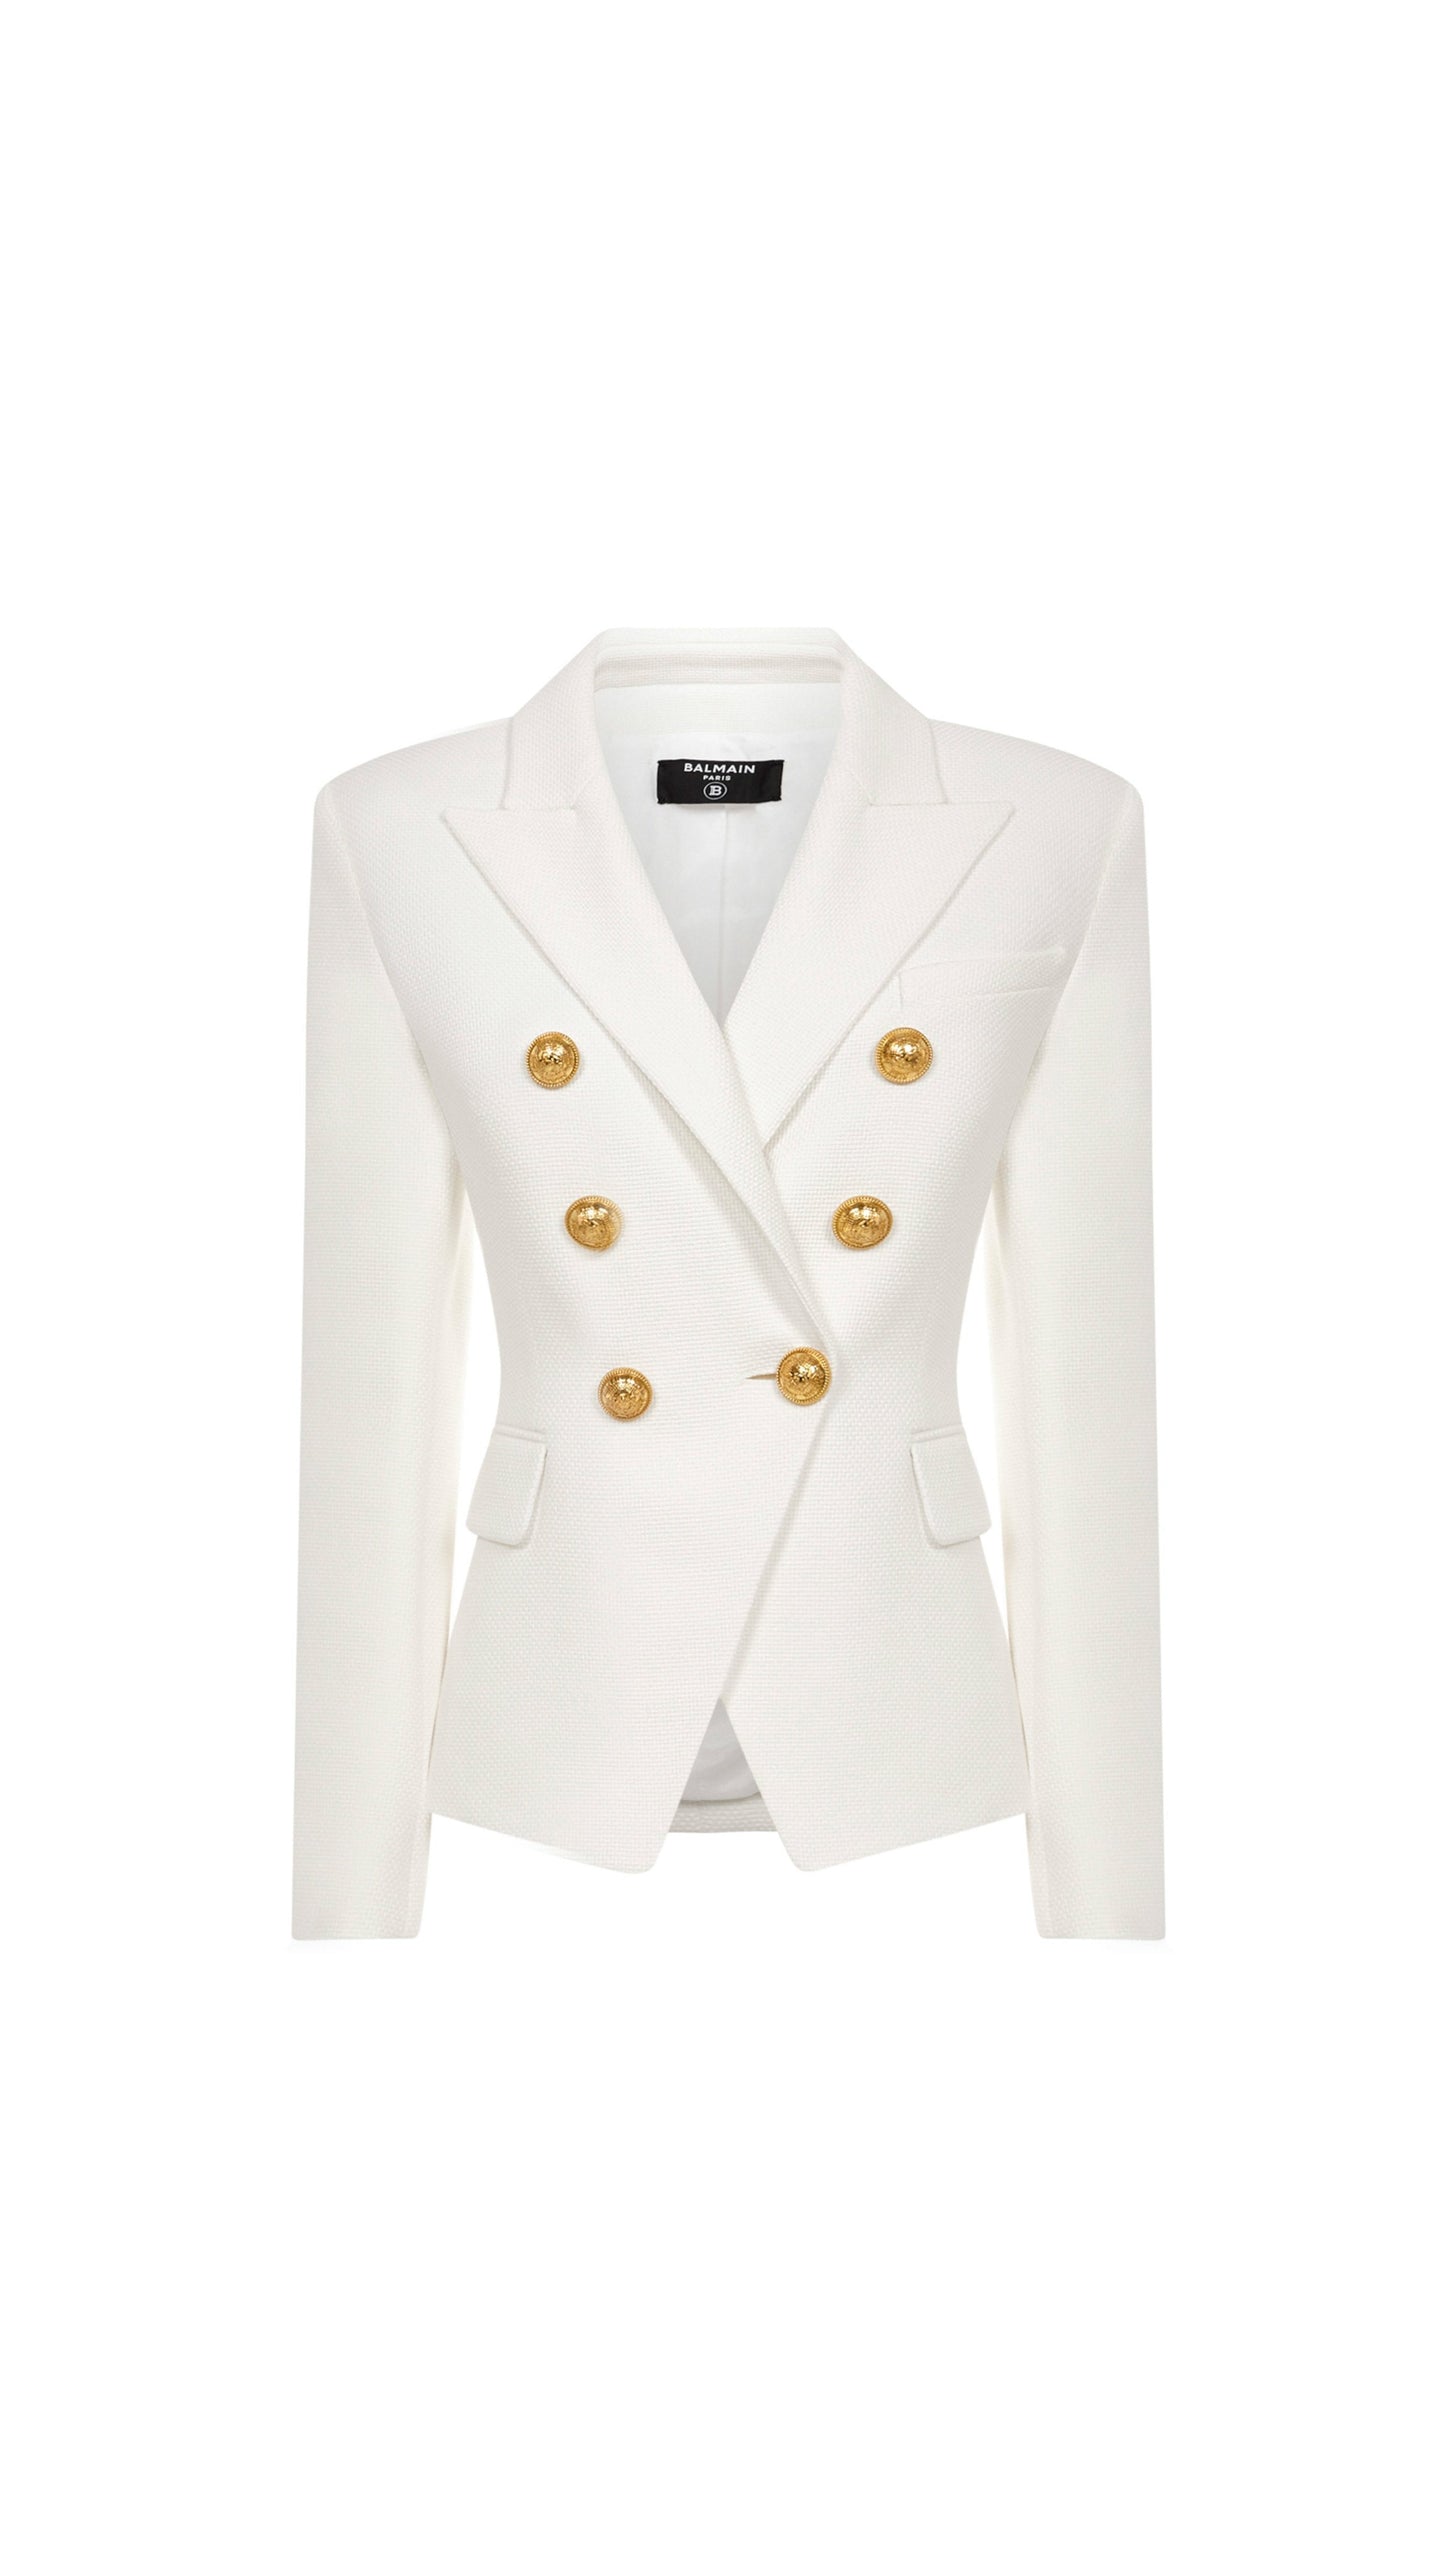 Blazer With Double-Breasted Gold-Tone Buttoned Closure - White